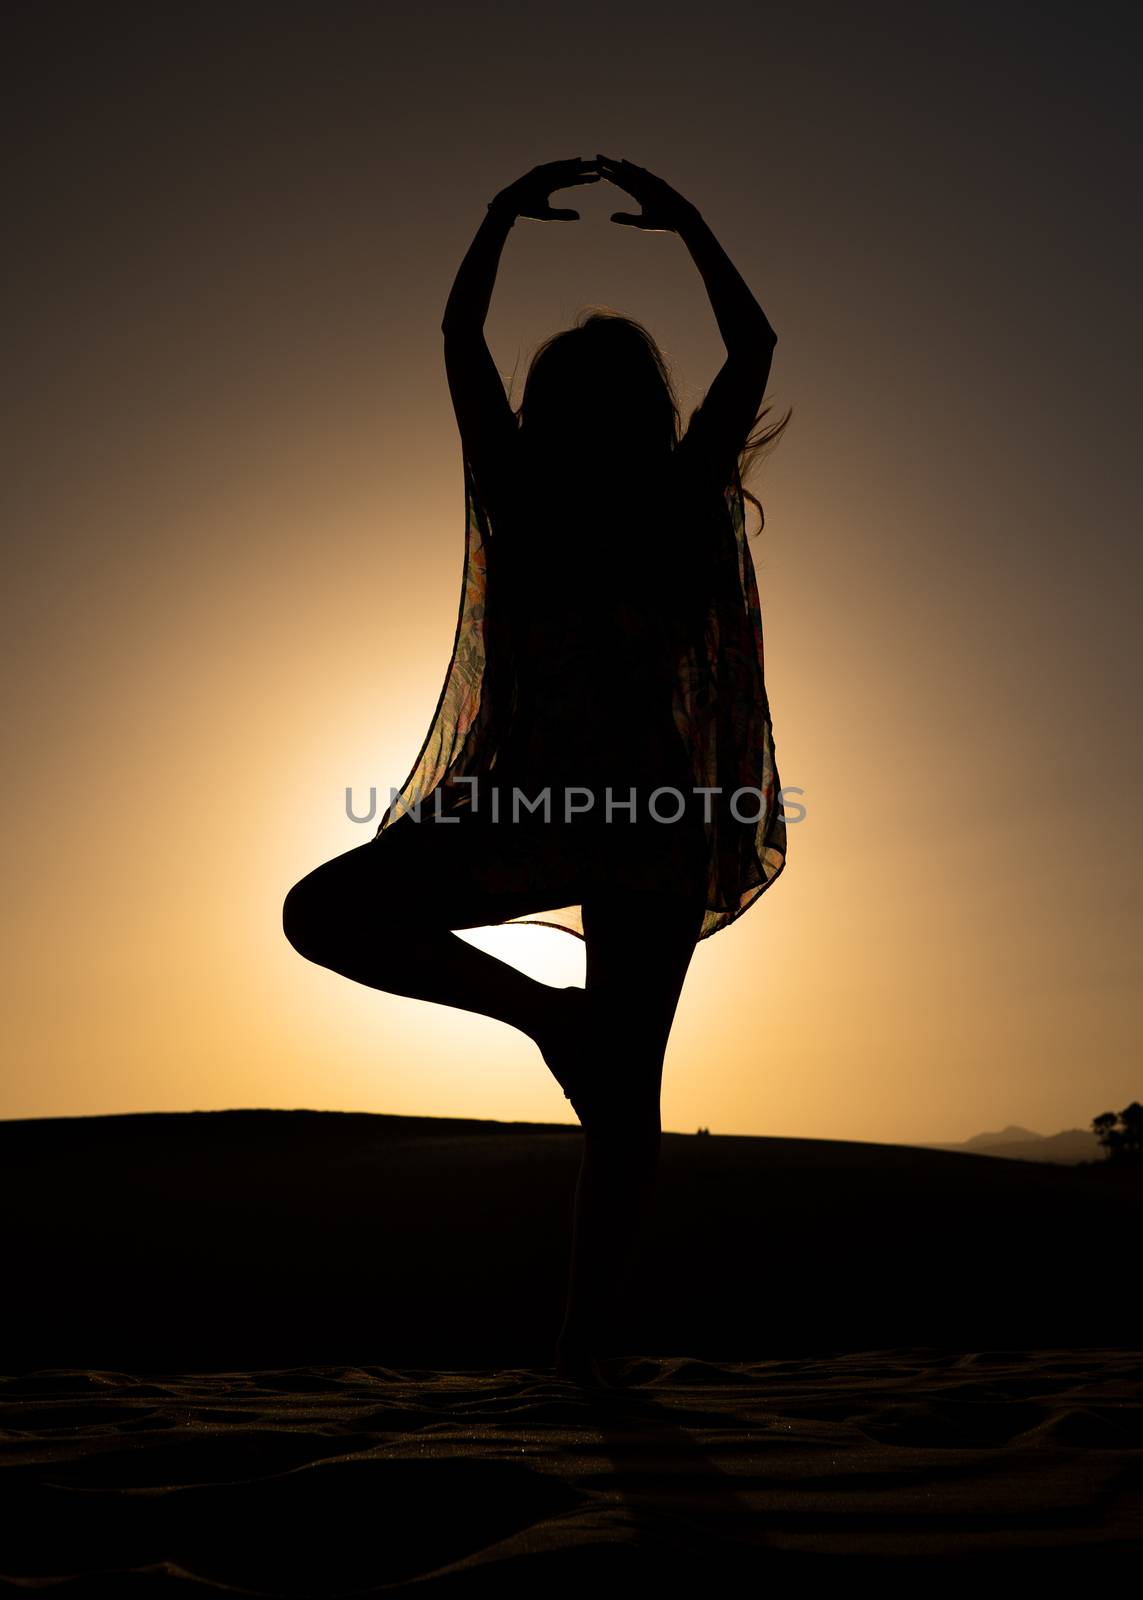 A young attractive female silhouette in a dancing stance in front of a beautiful sunset